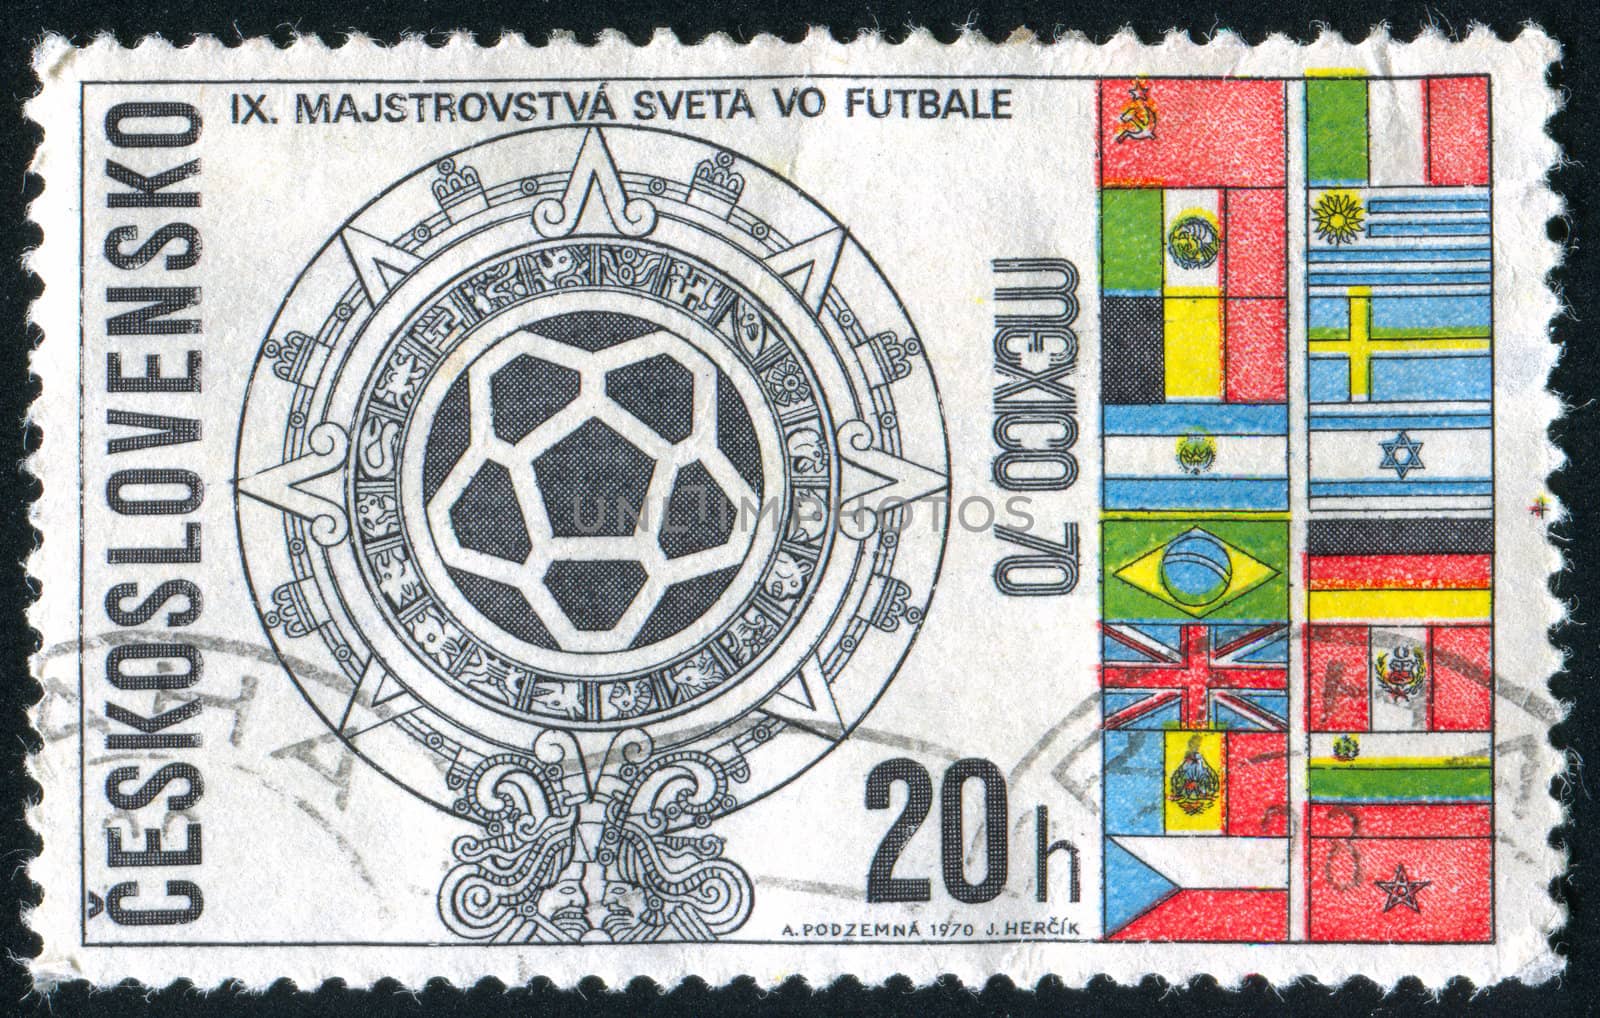 CZECHOSLOVAKIA - CIRCA 1970: stamp printed by Czechoslovakia, shows Sundisk Games� emblem and flags, circa 1970